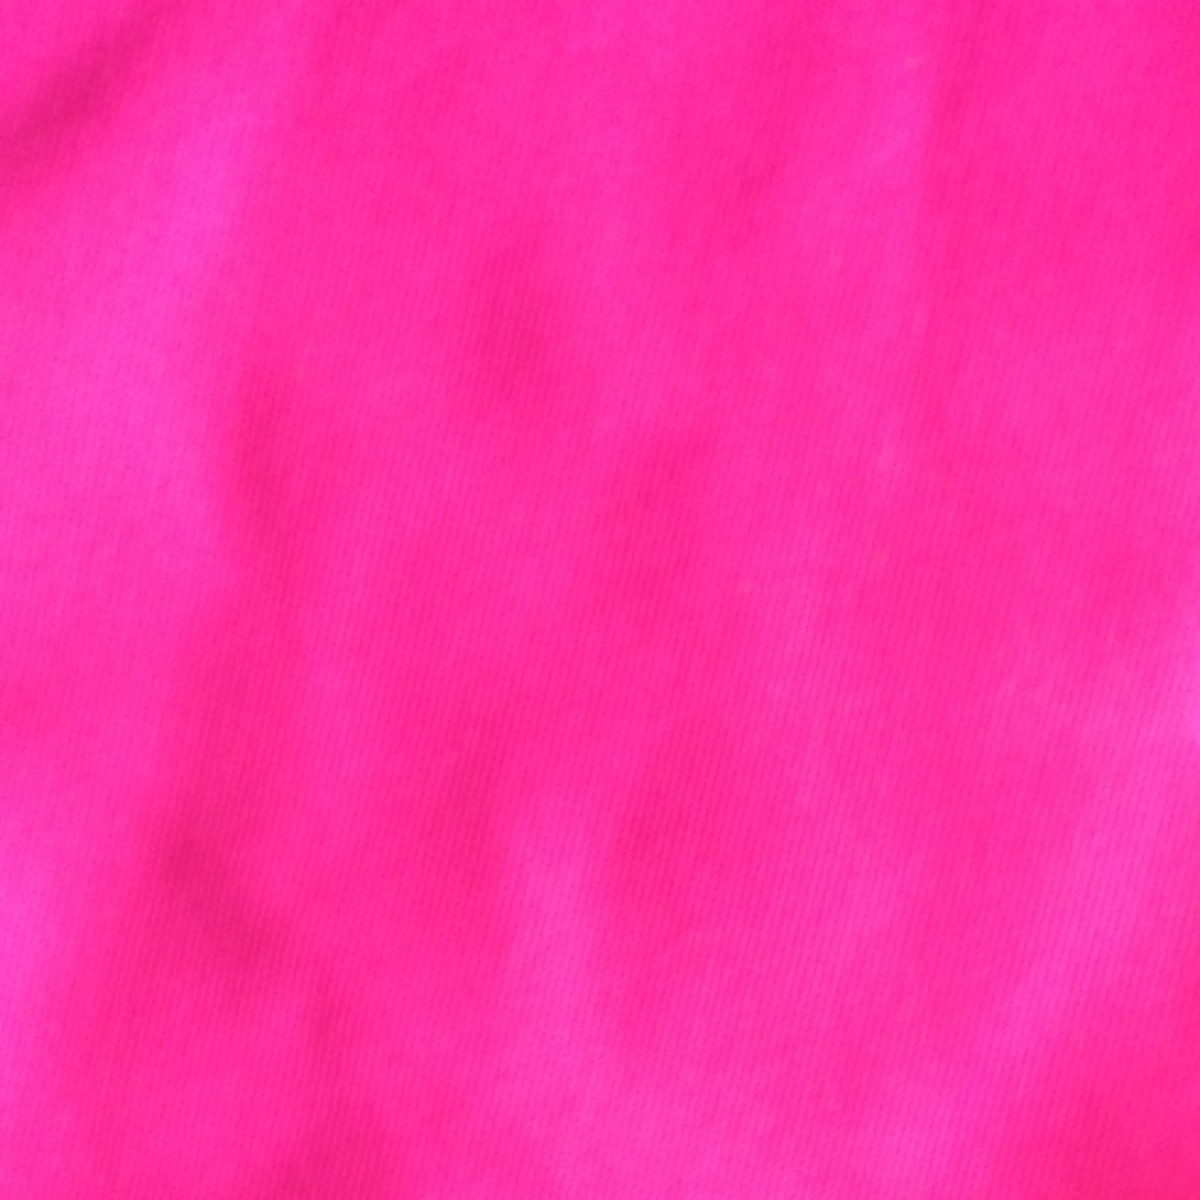 Neon Pink Background Wallpaper On